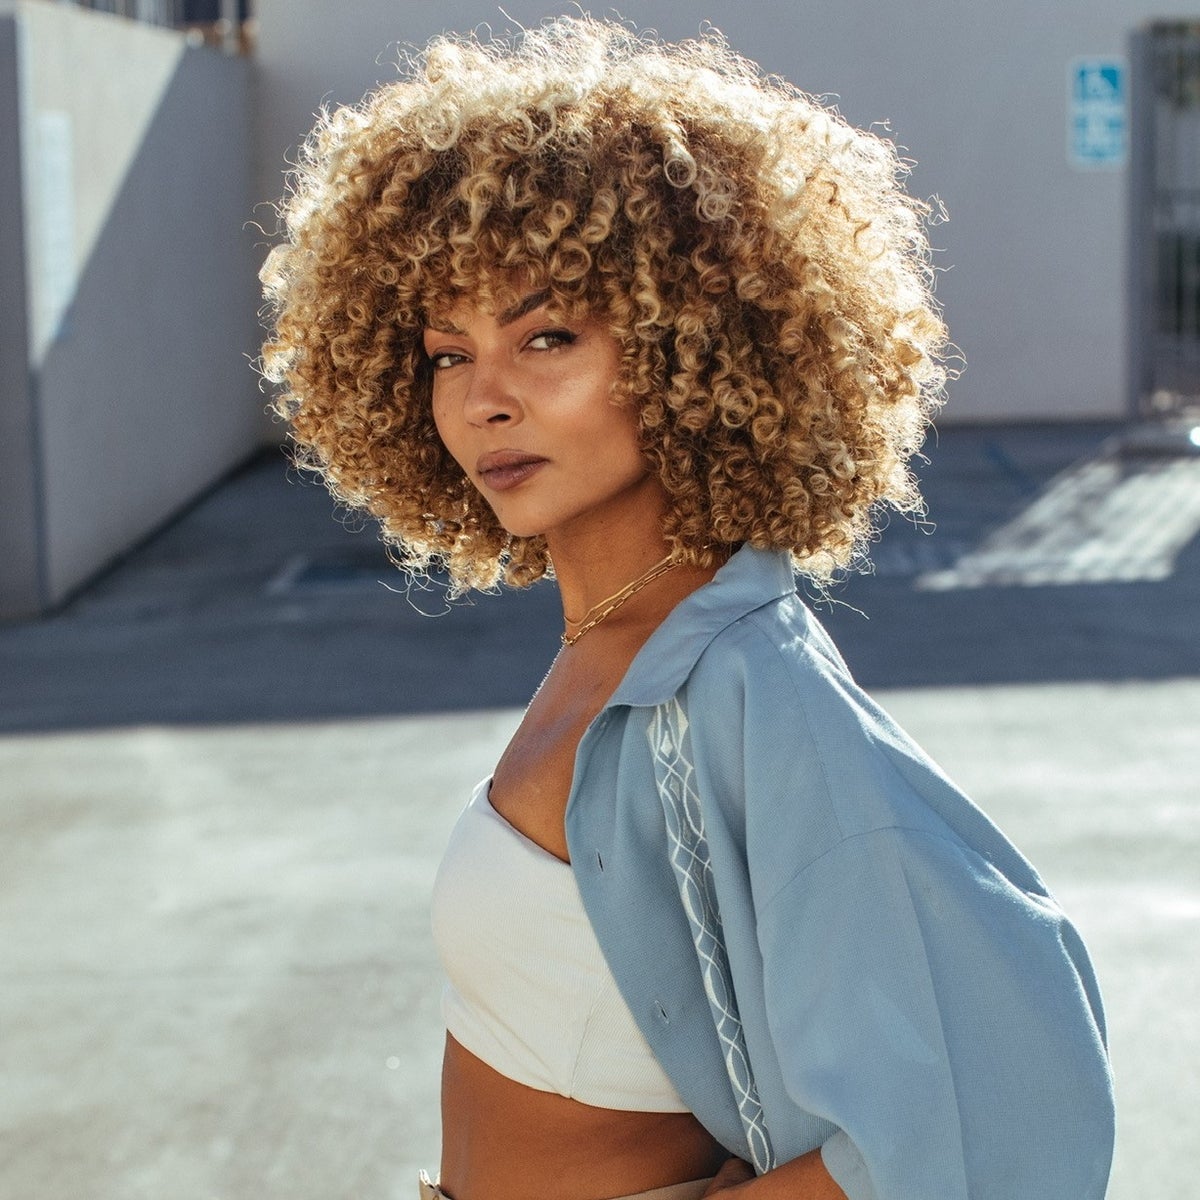 Dancer Ashley Everett Launches New Wellness Brand To Help Us Be ...